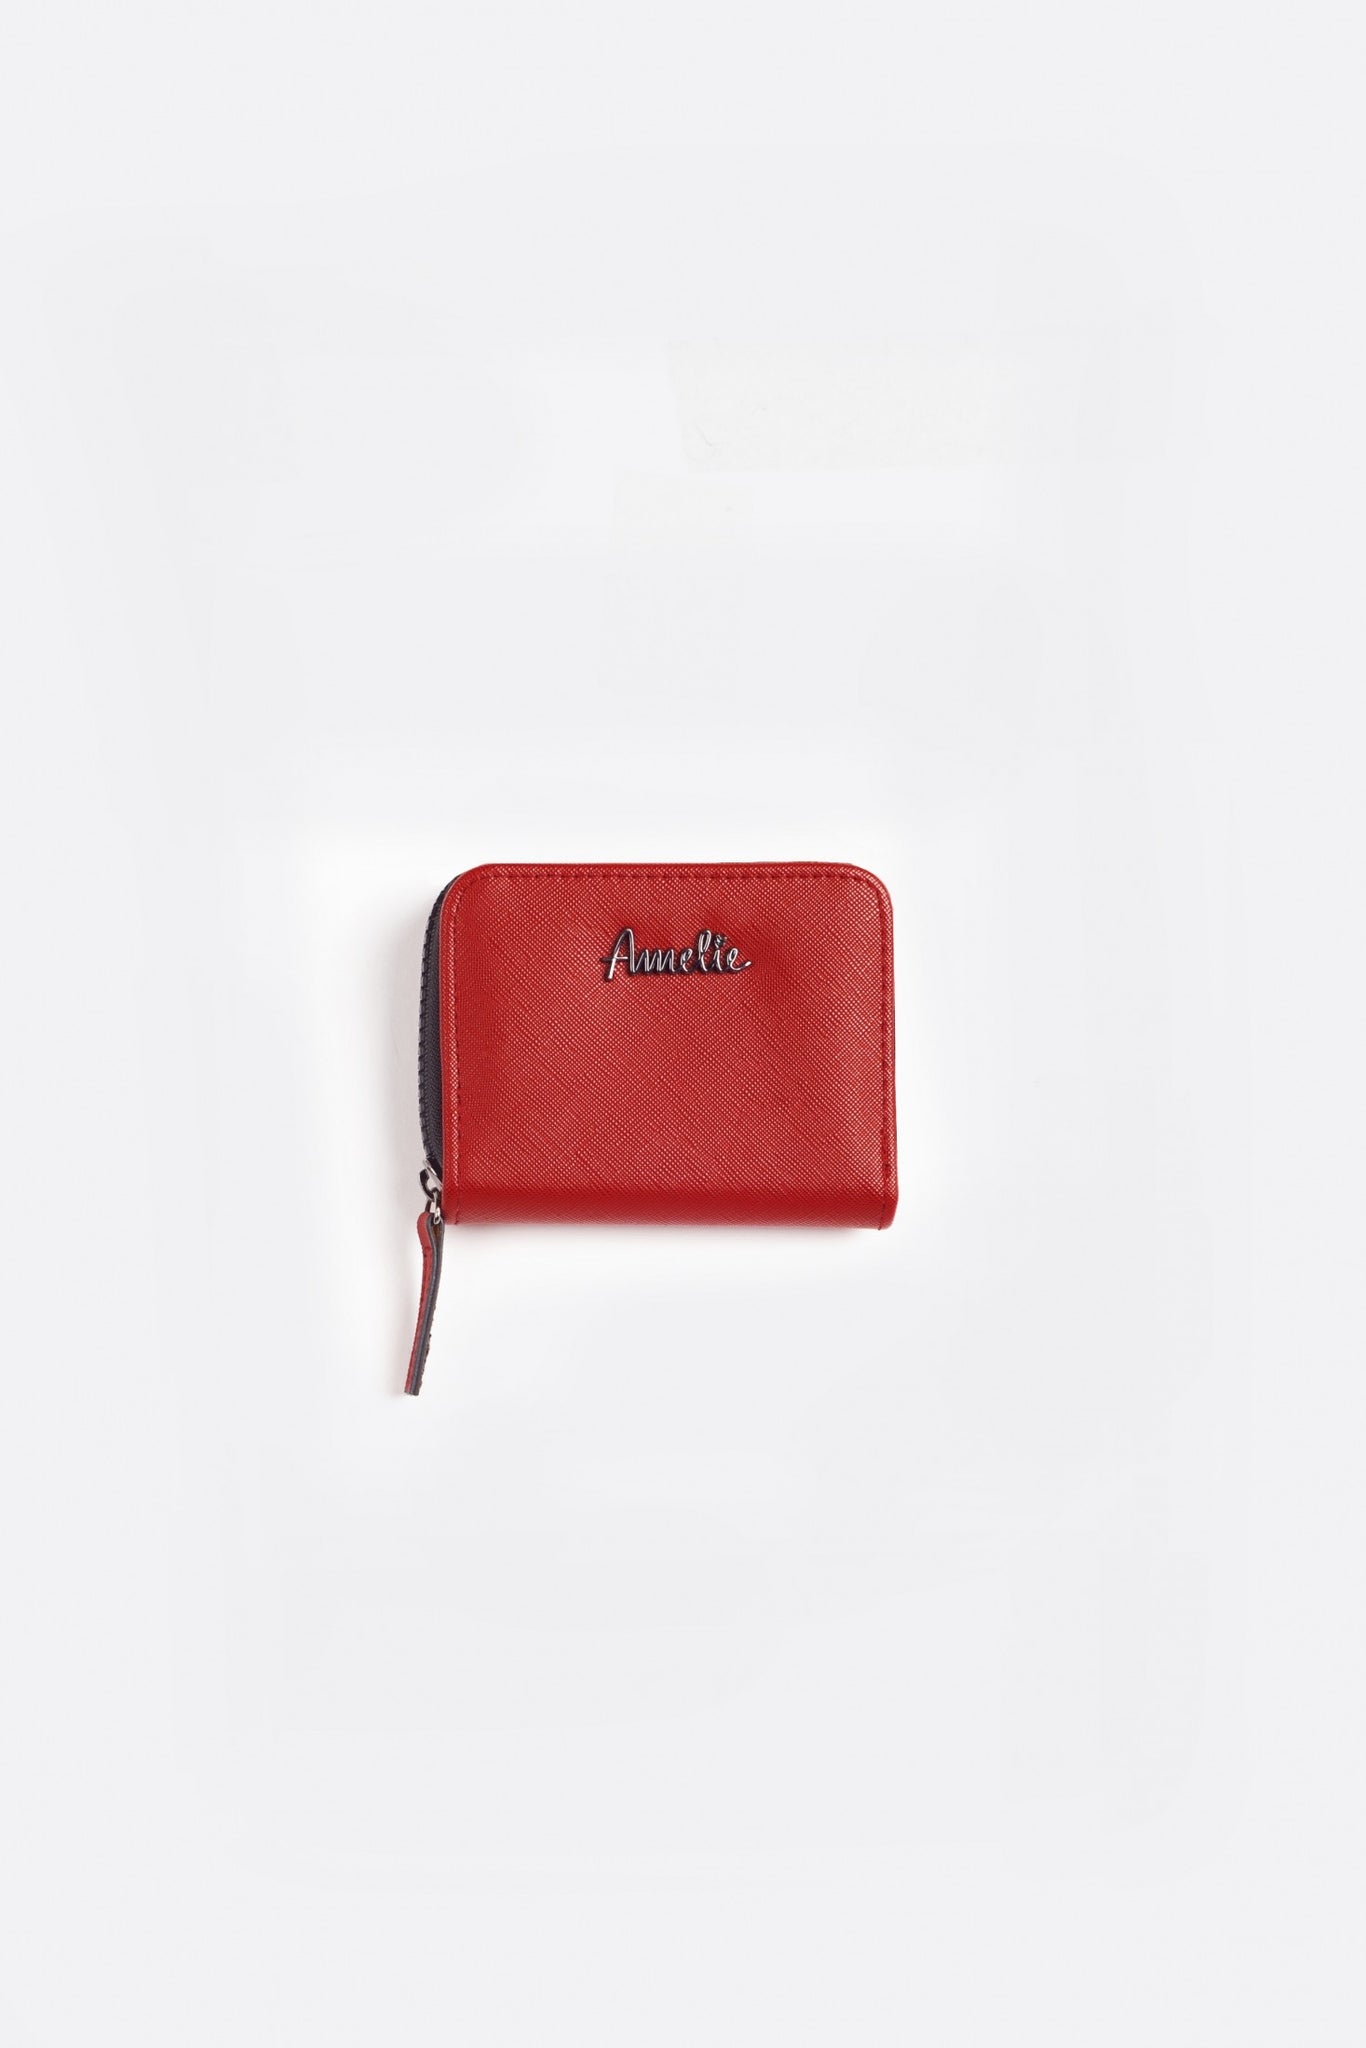 Amelie small wallet